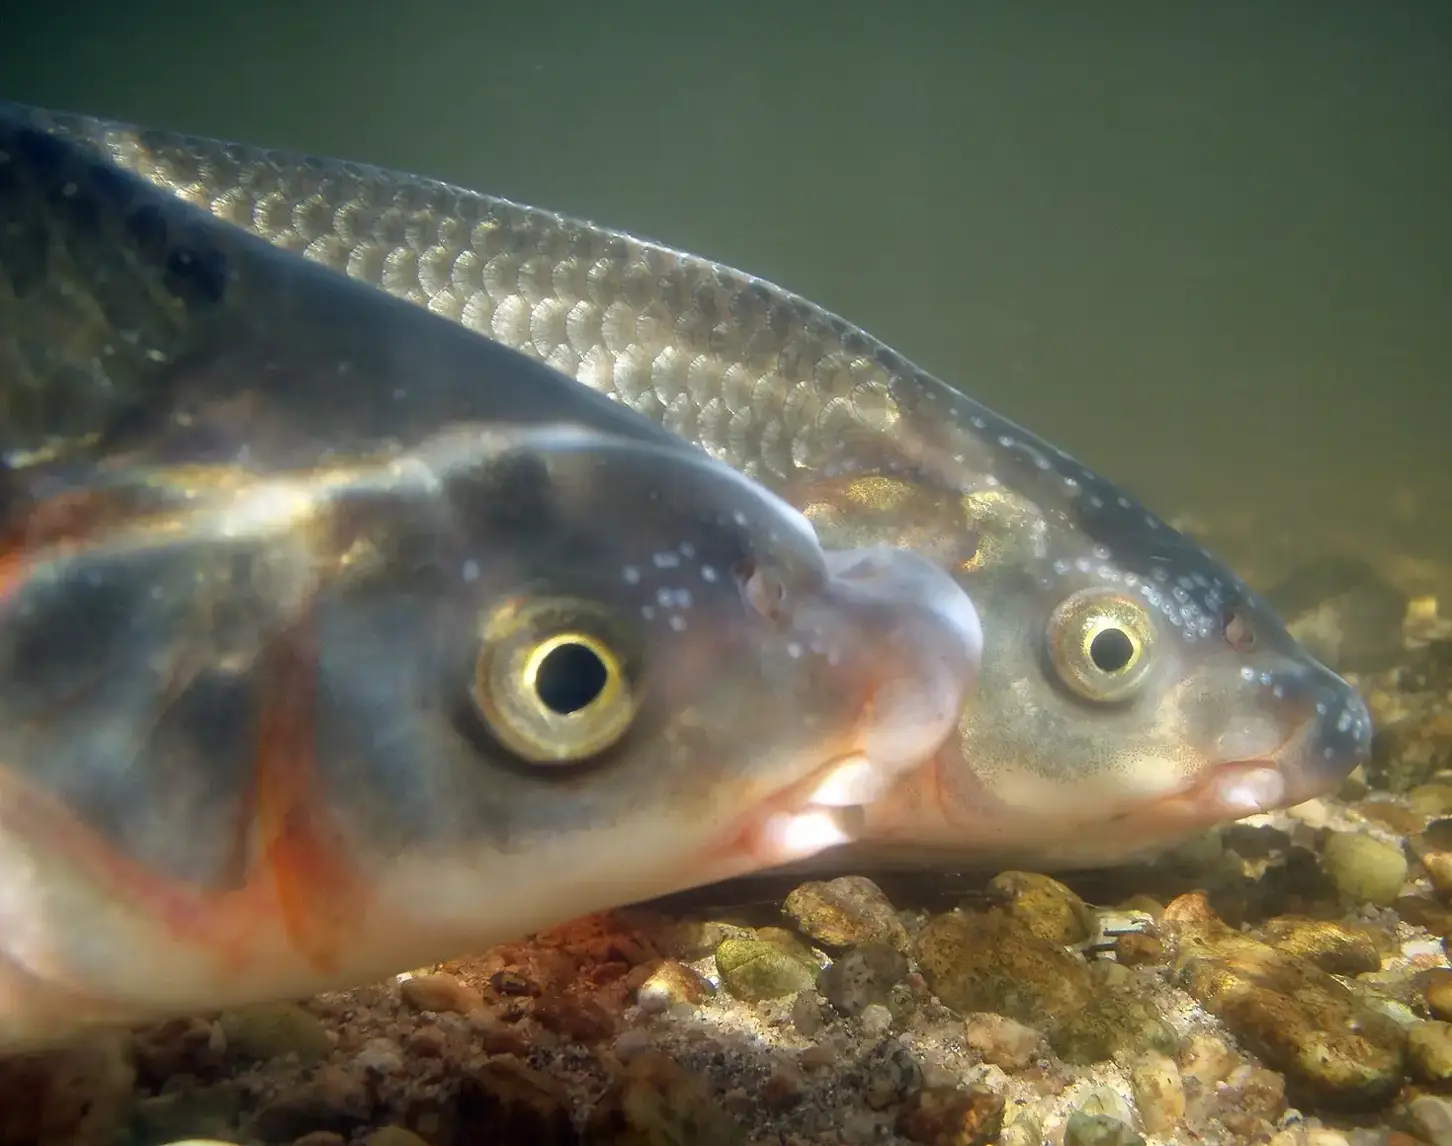 The nase is a gregarious fish from the large group of cyprinids.